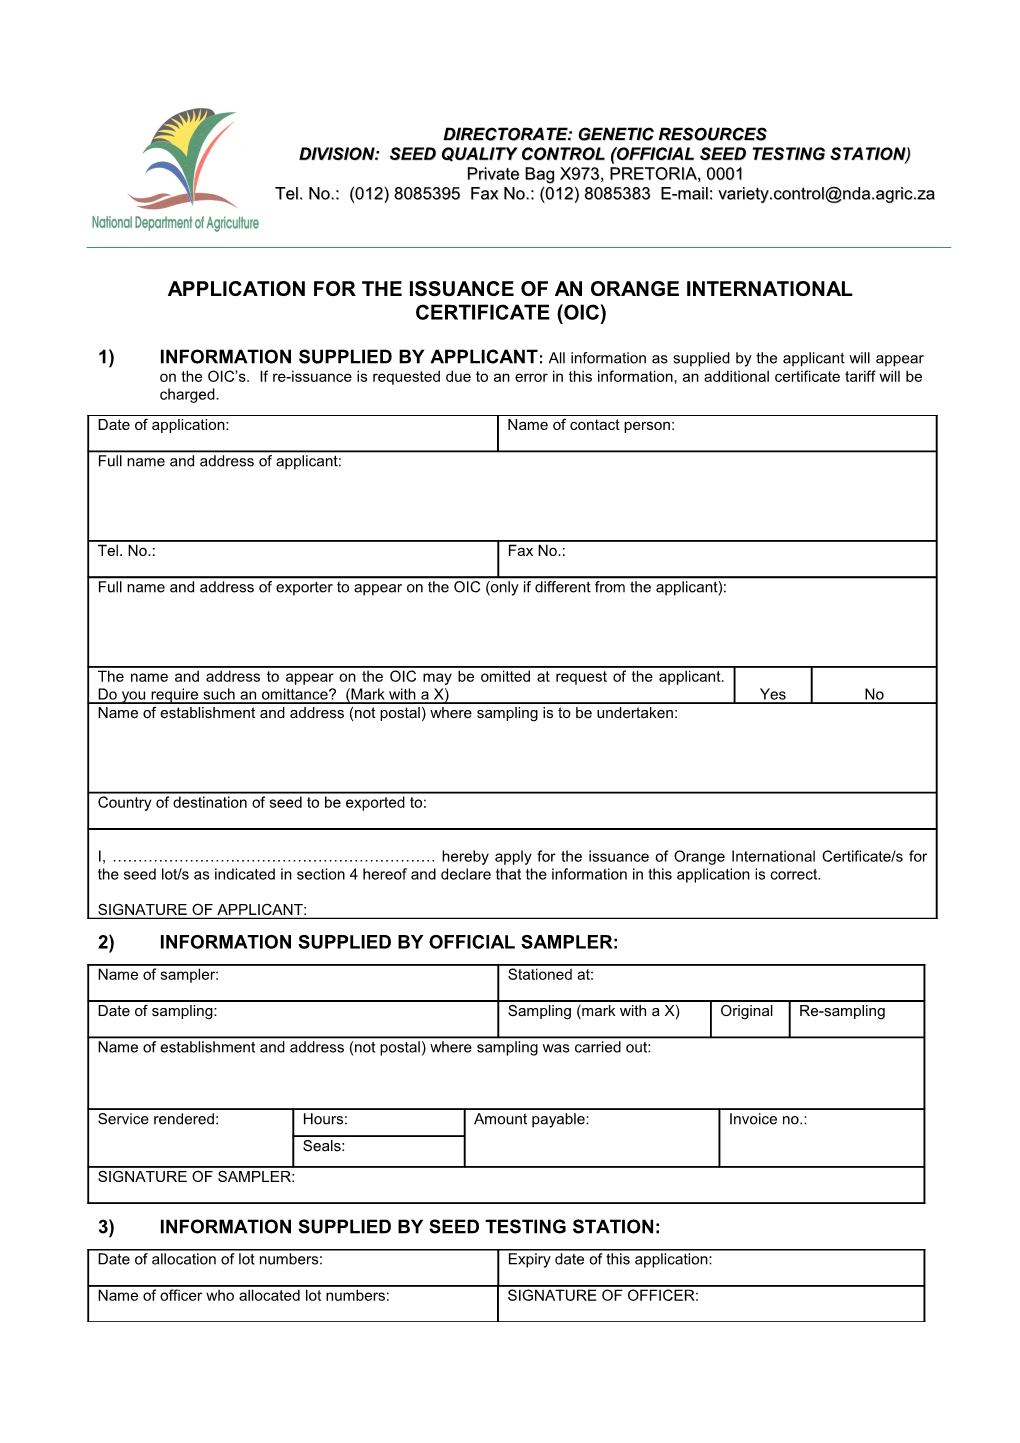 Application for the Issuance of an Orange Internationalcertificate (Oic)